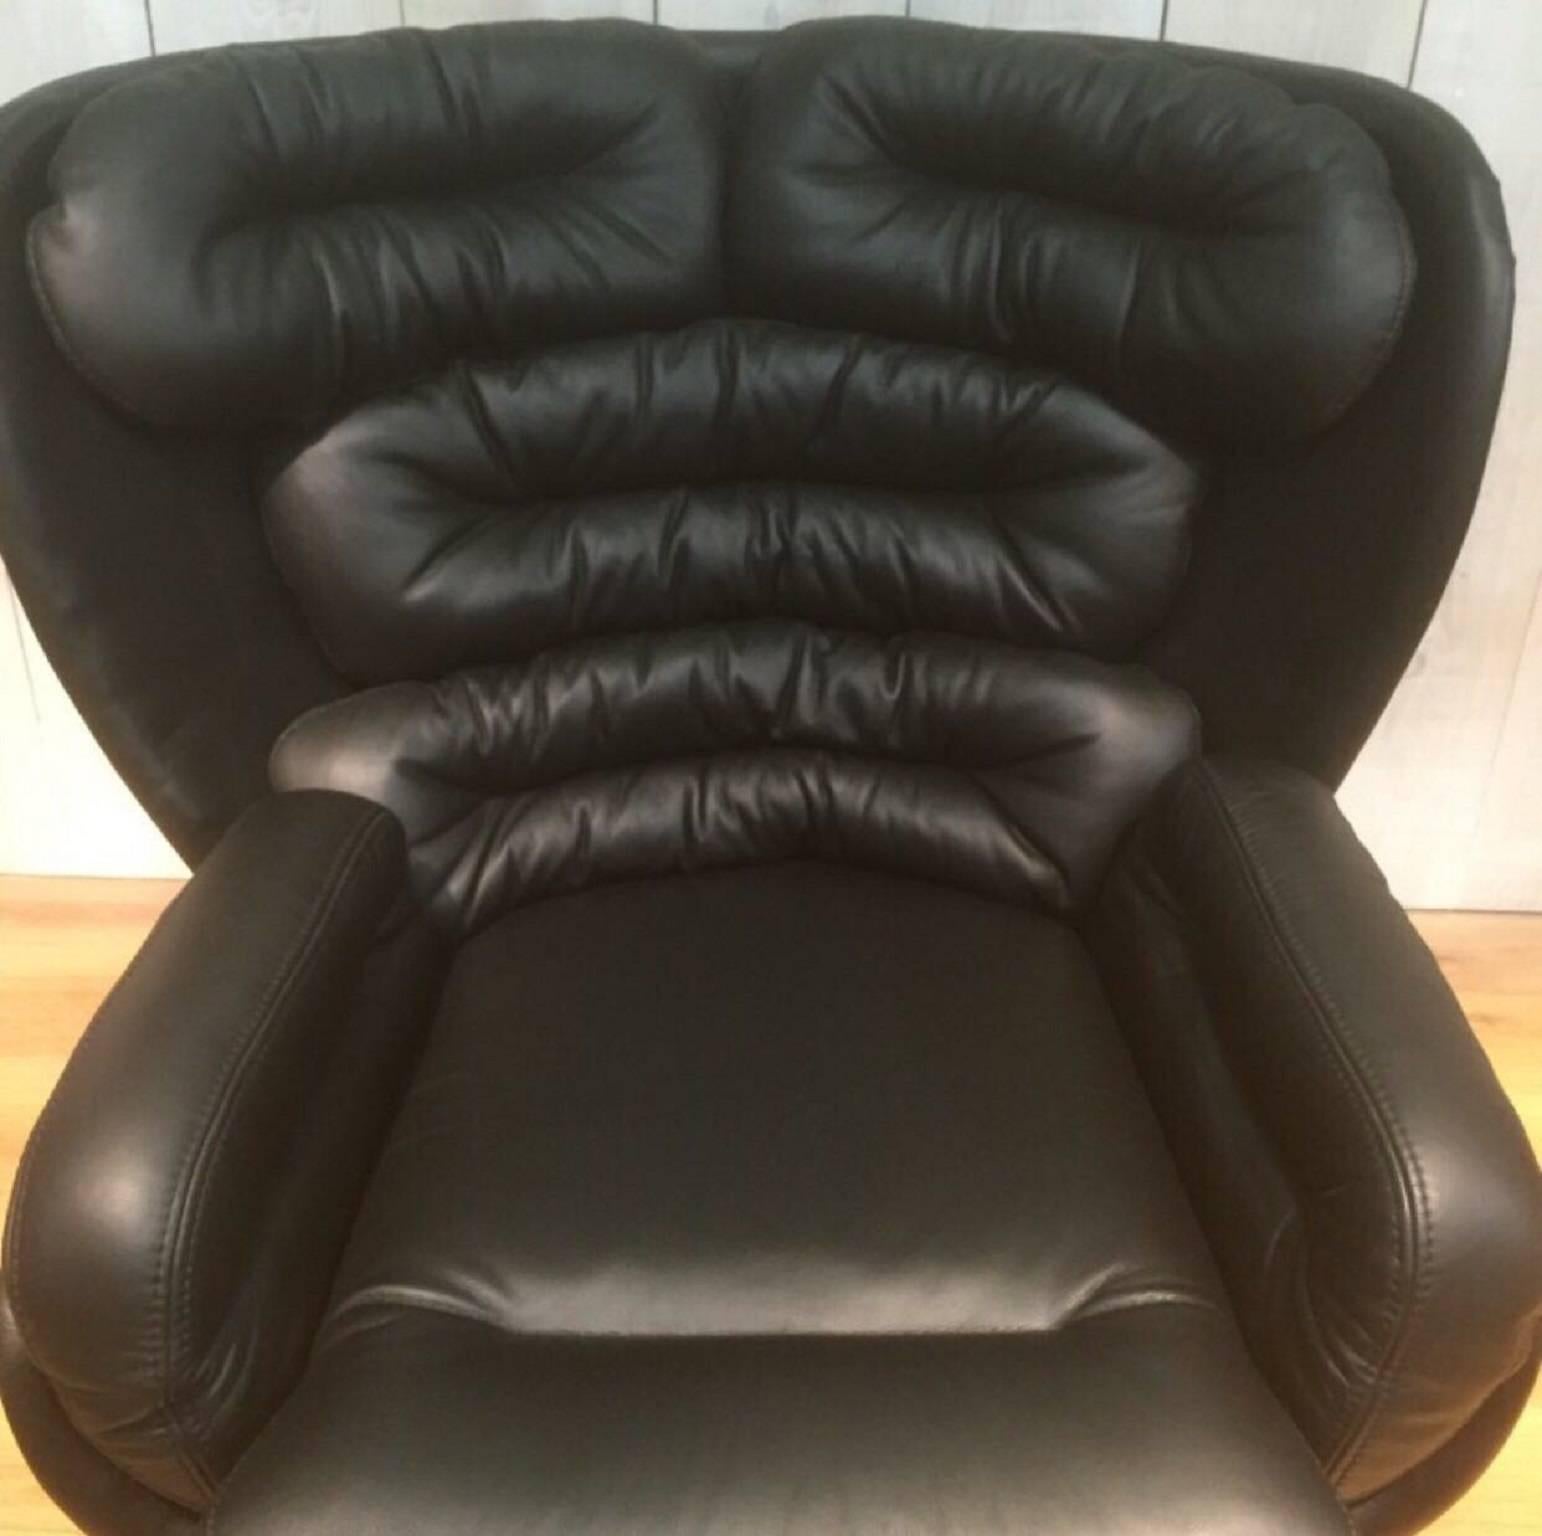 Pair of Elda armchairs by Joe Colomboe
Longhi edition
Black leather, black shell.